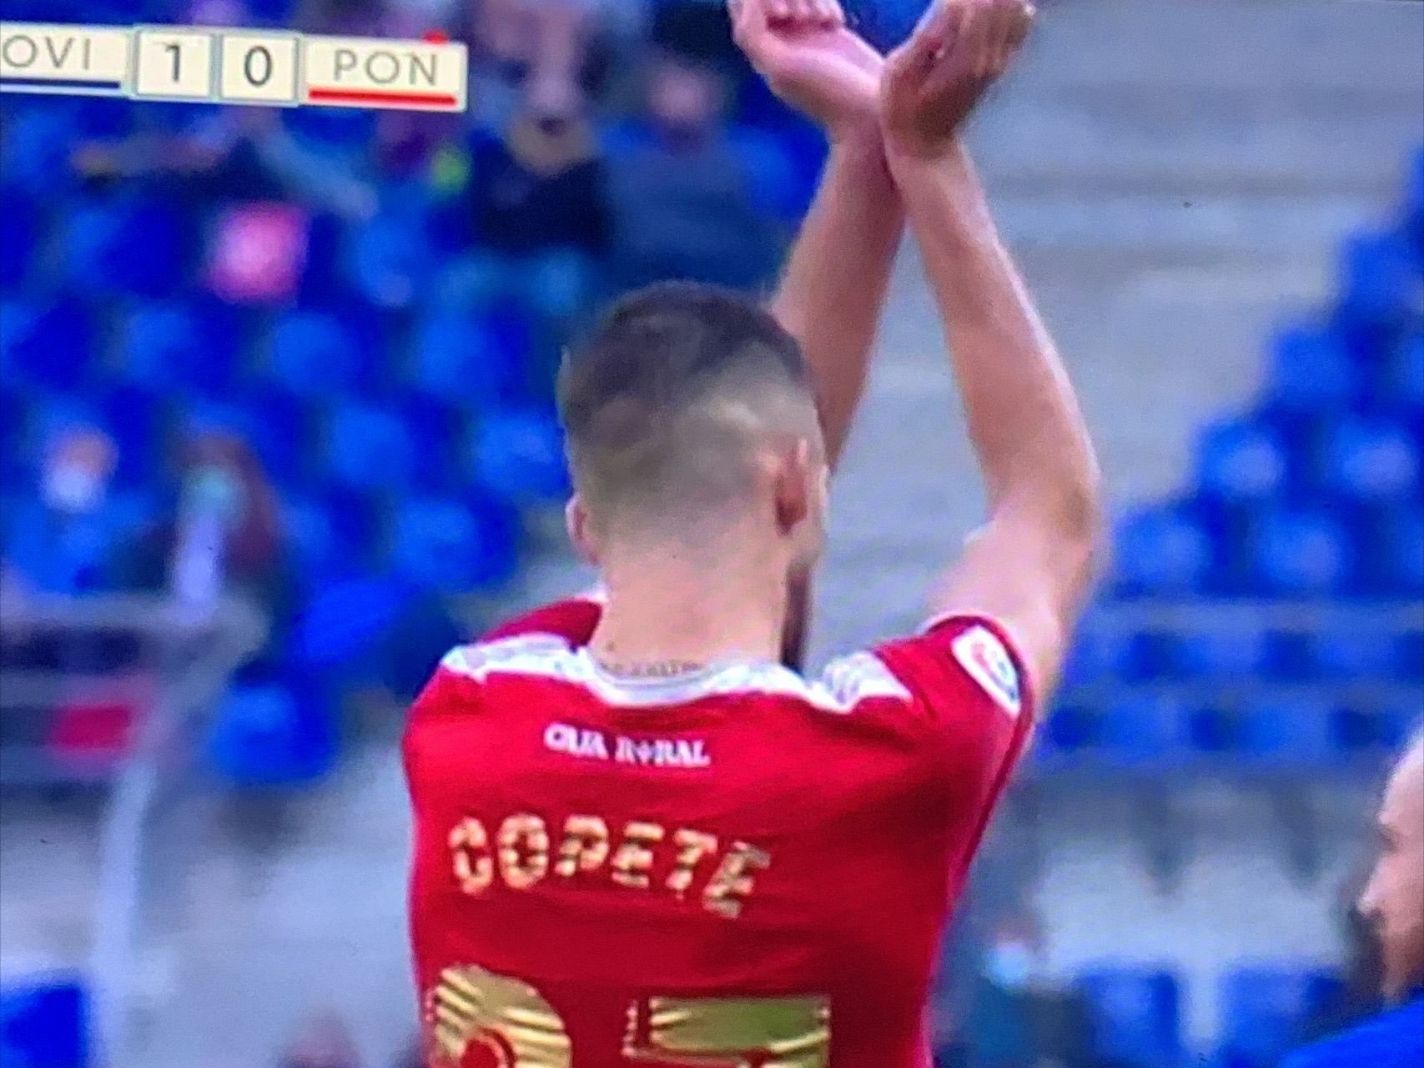 Spanish player makes handcuffs gesture to referee – Here’s why